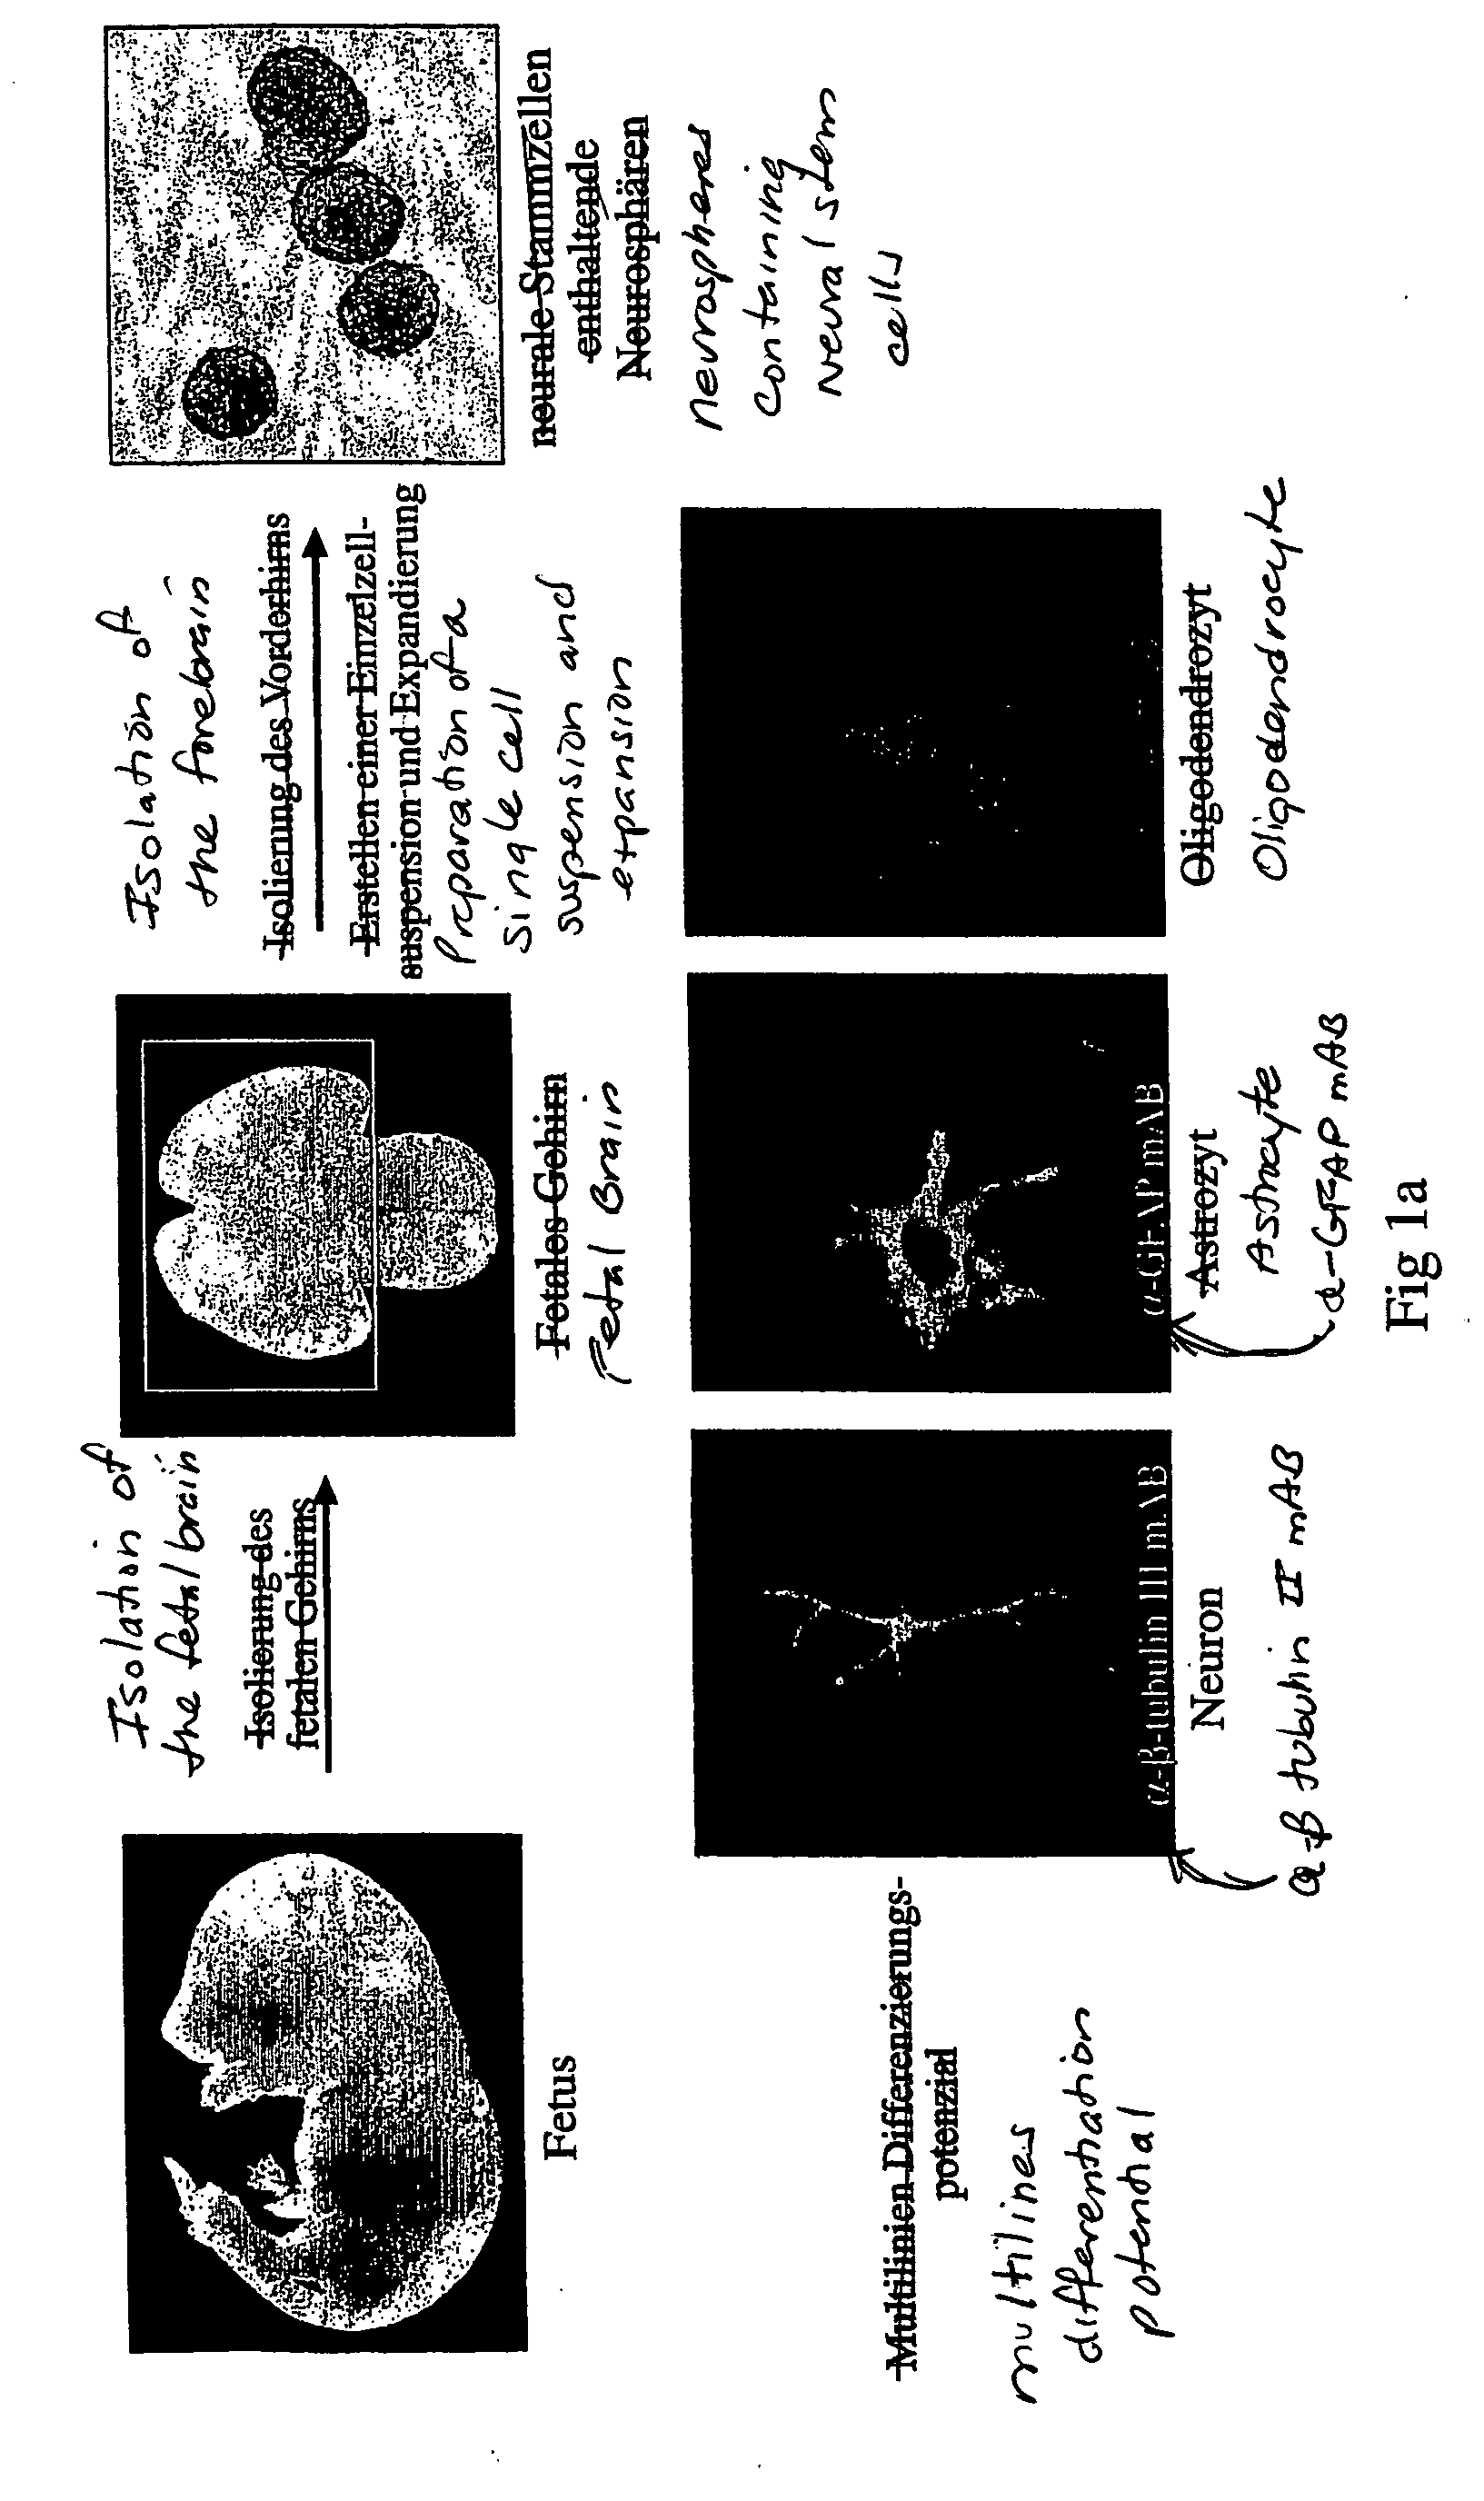 Method for producing stem cells with increased developmental potential